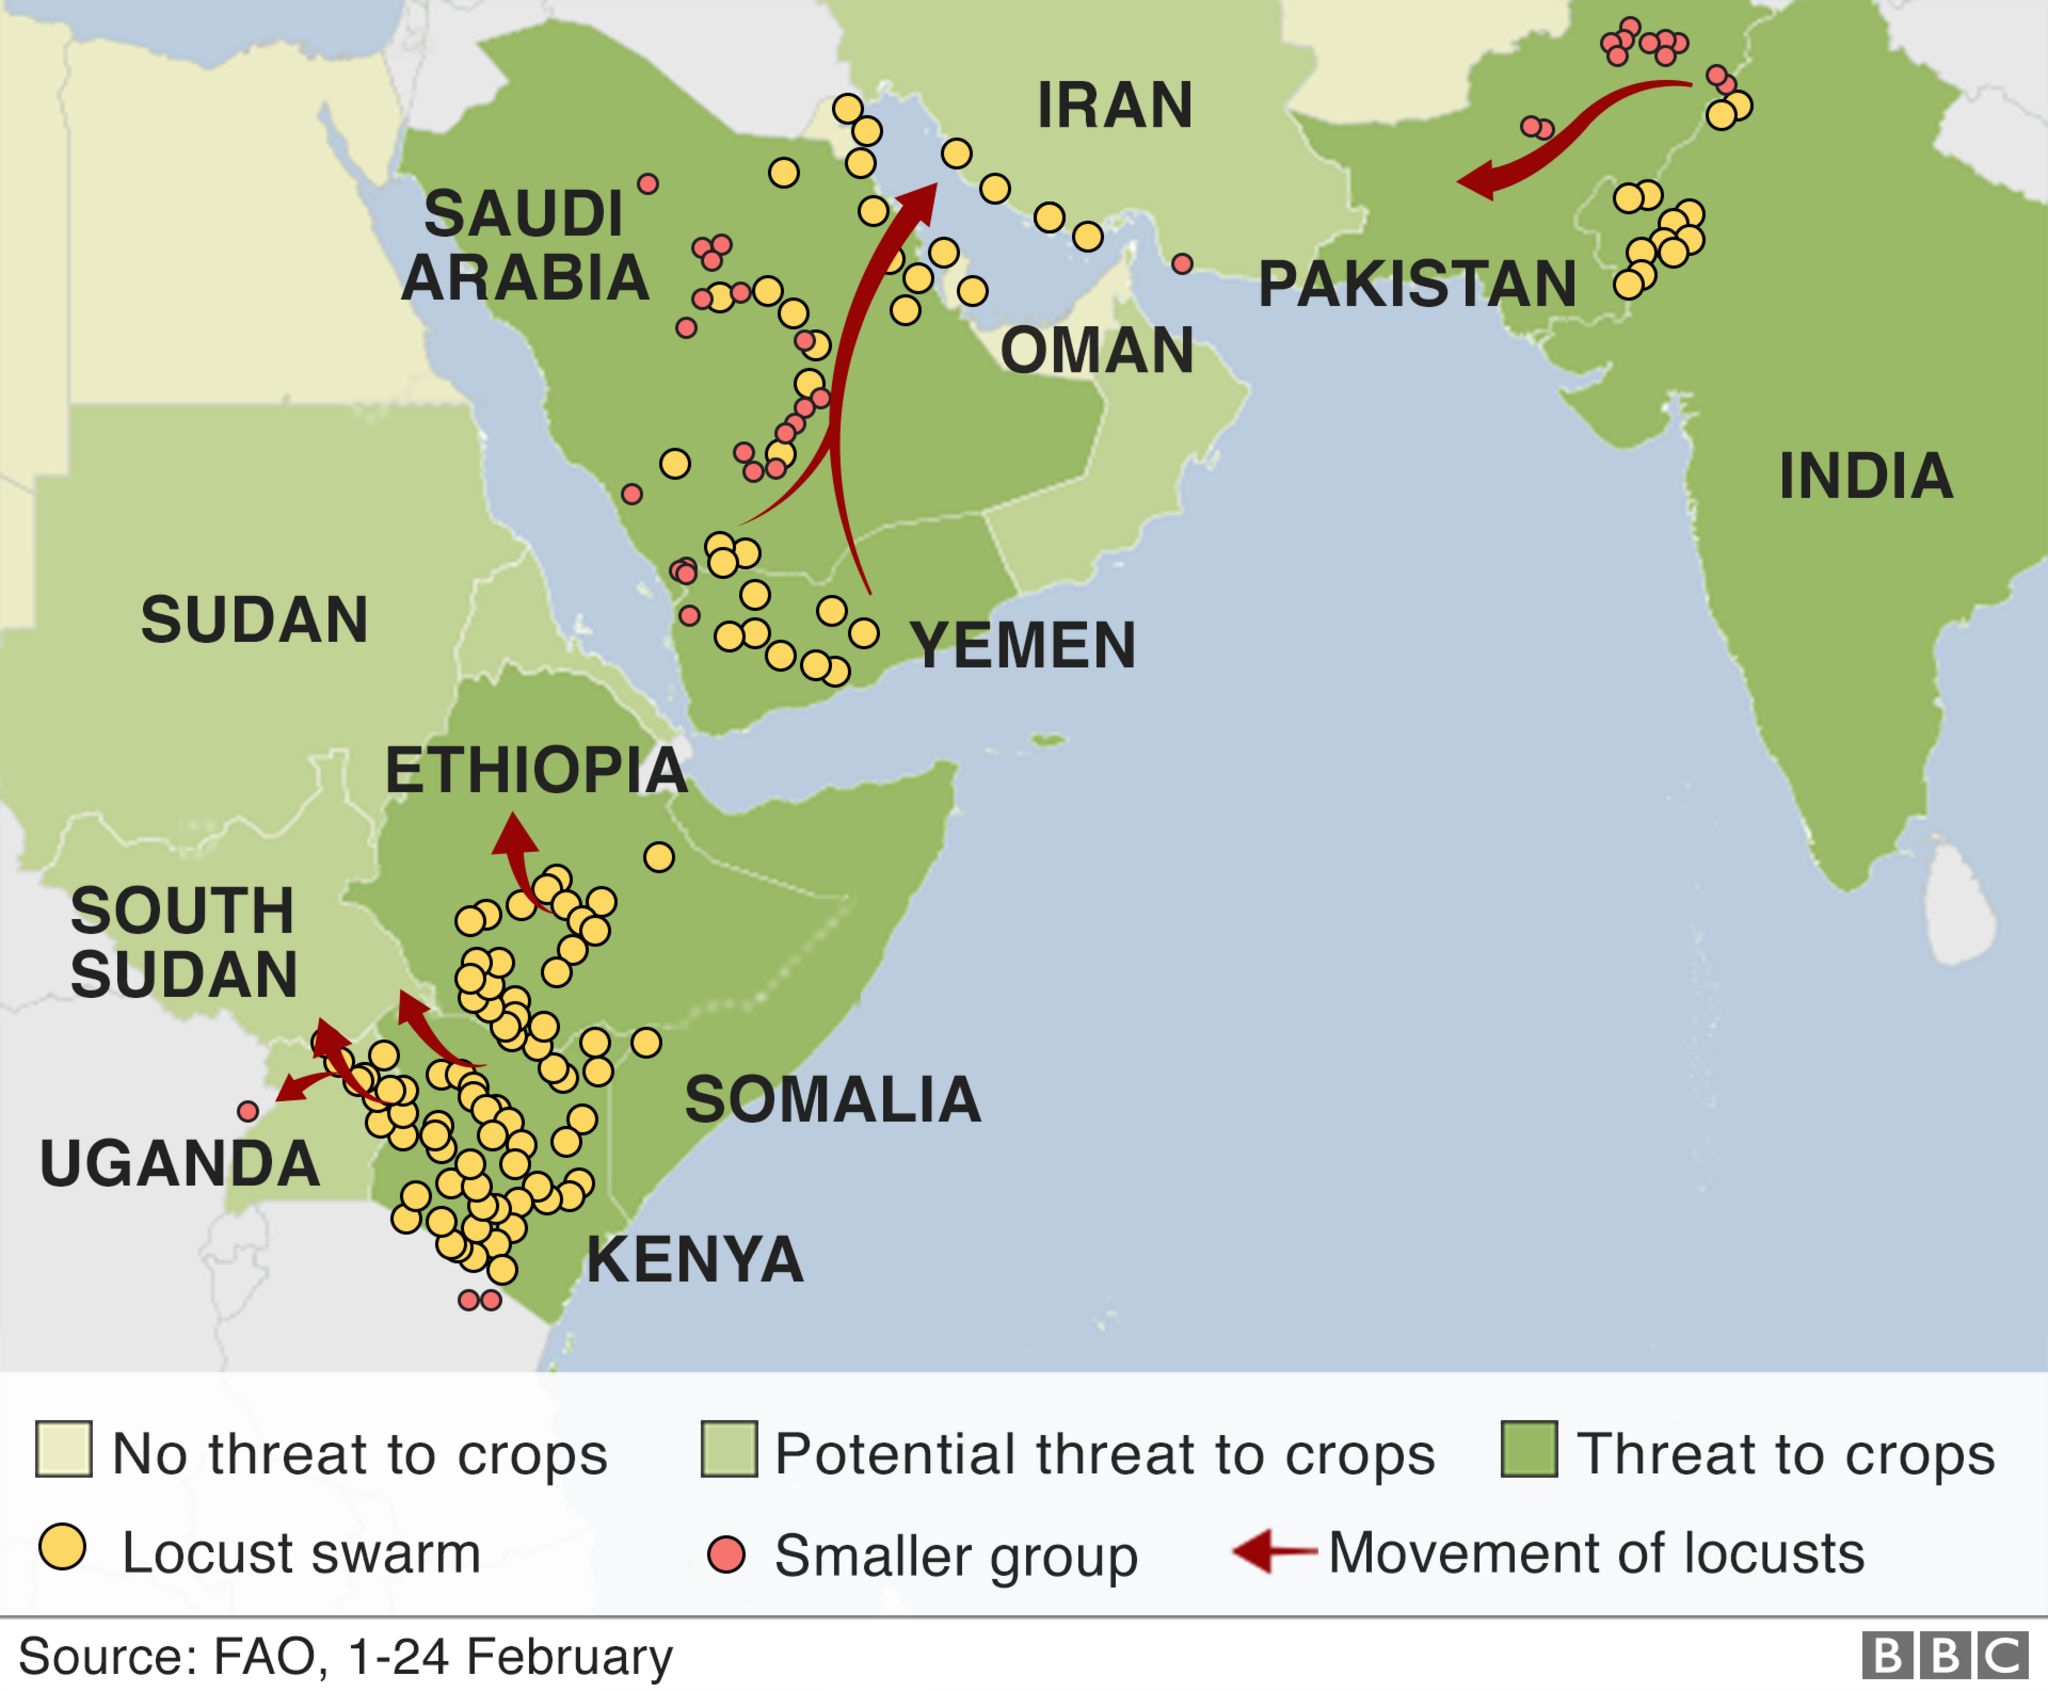 Map showing locusts swarms across parts of Africa and Asia